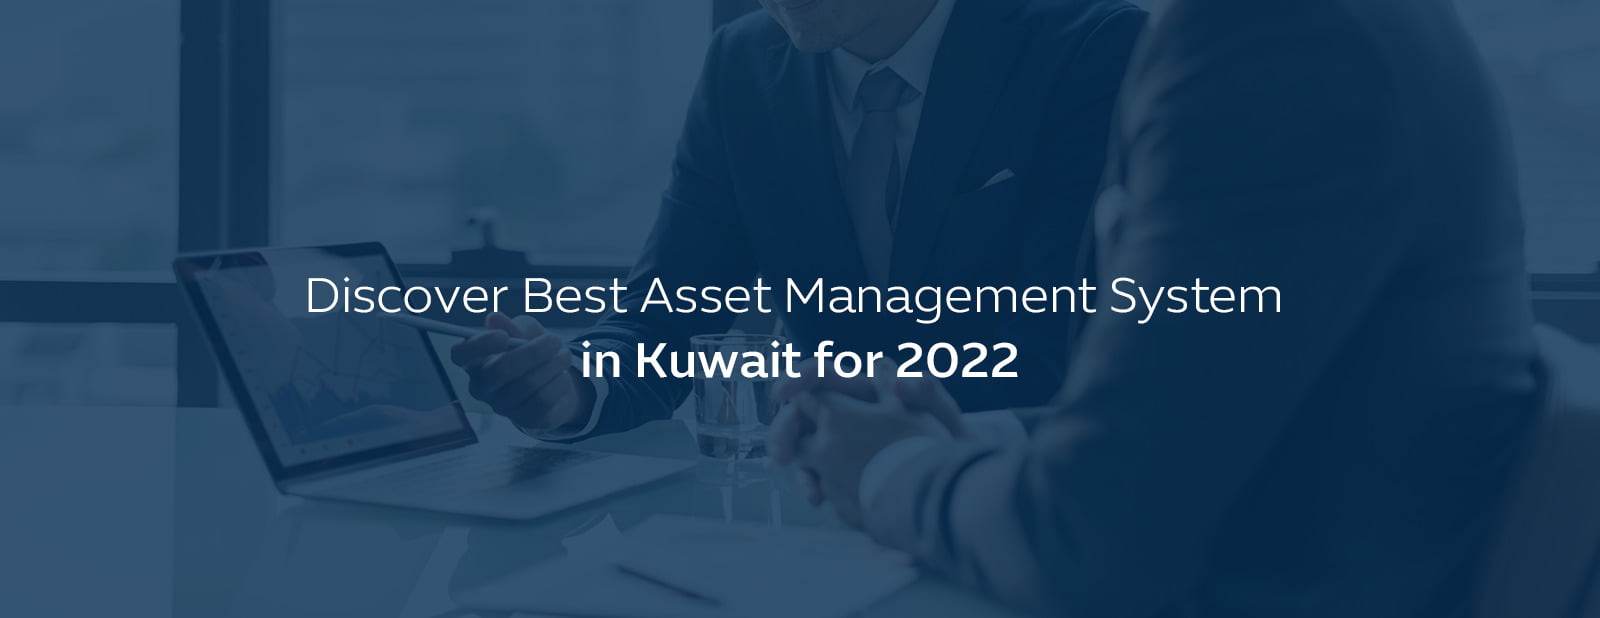 Discover Best Asset Management System in GCC for 2022